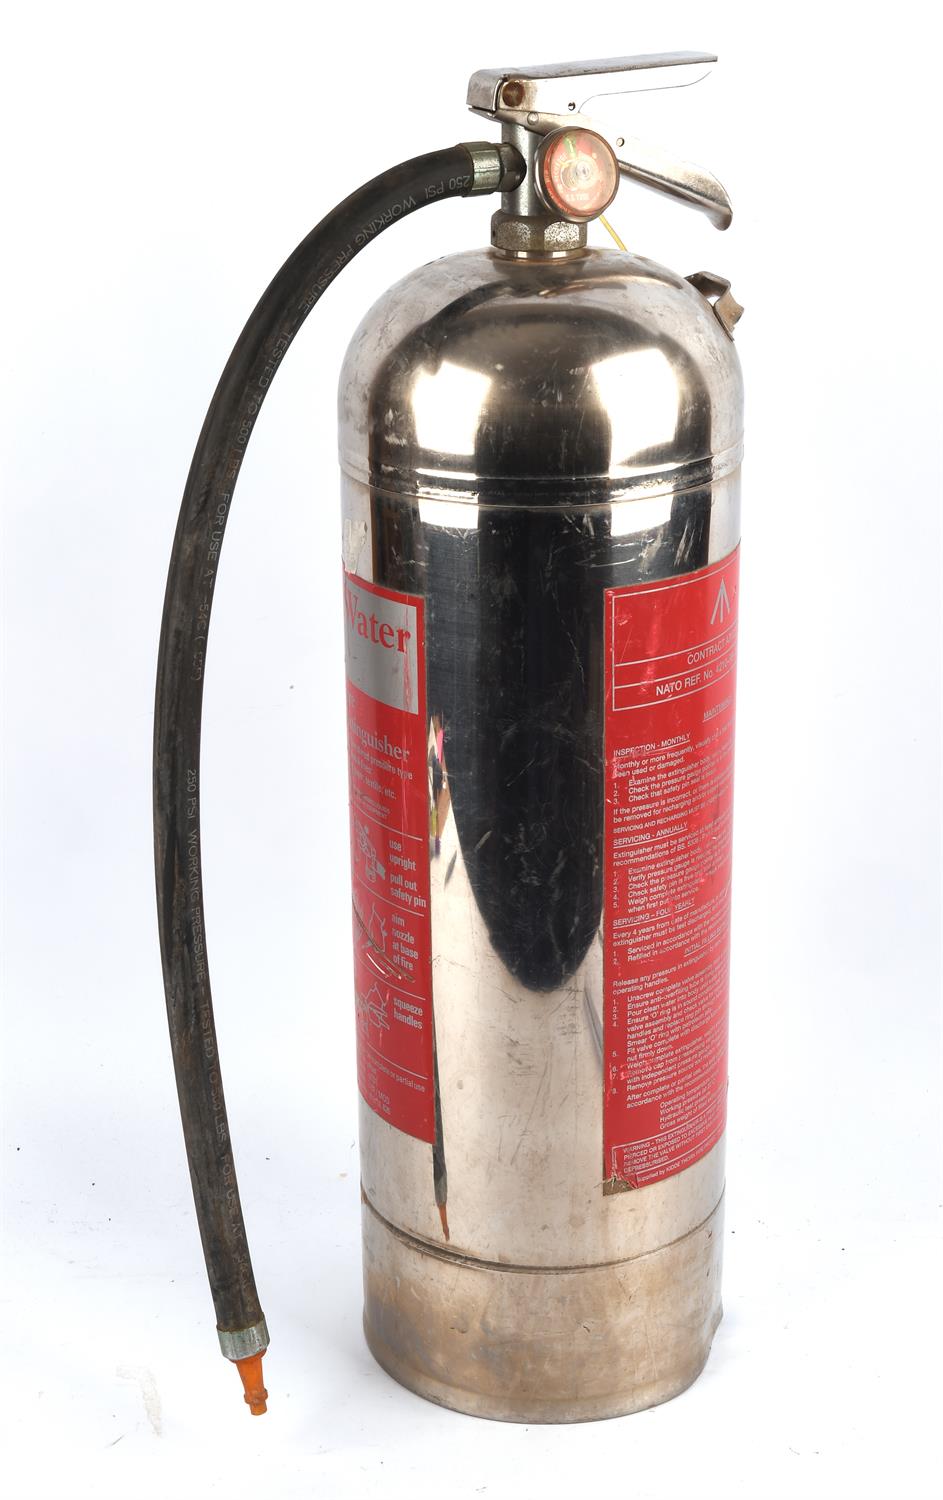 Batman Begins (2004) - Film prop production used stainless steel fire extinguisher.